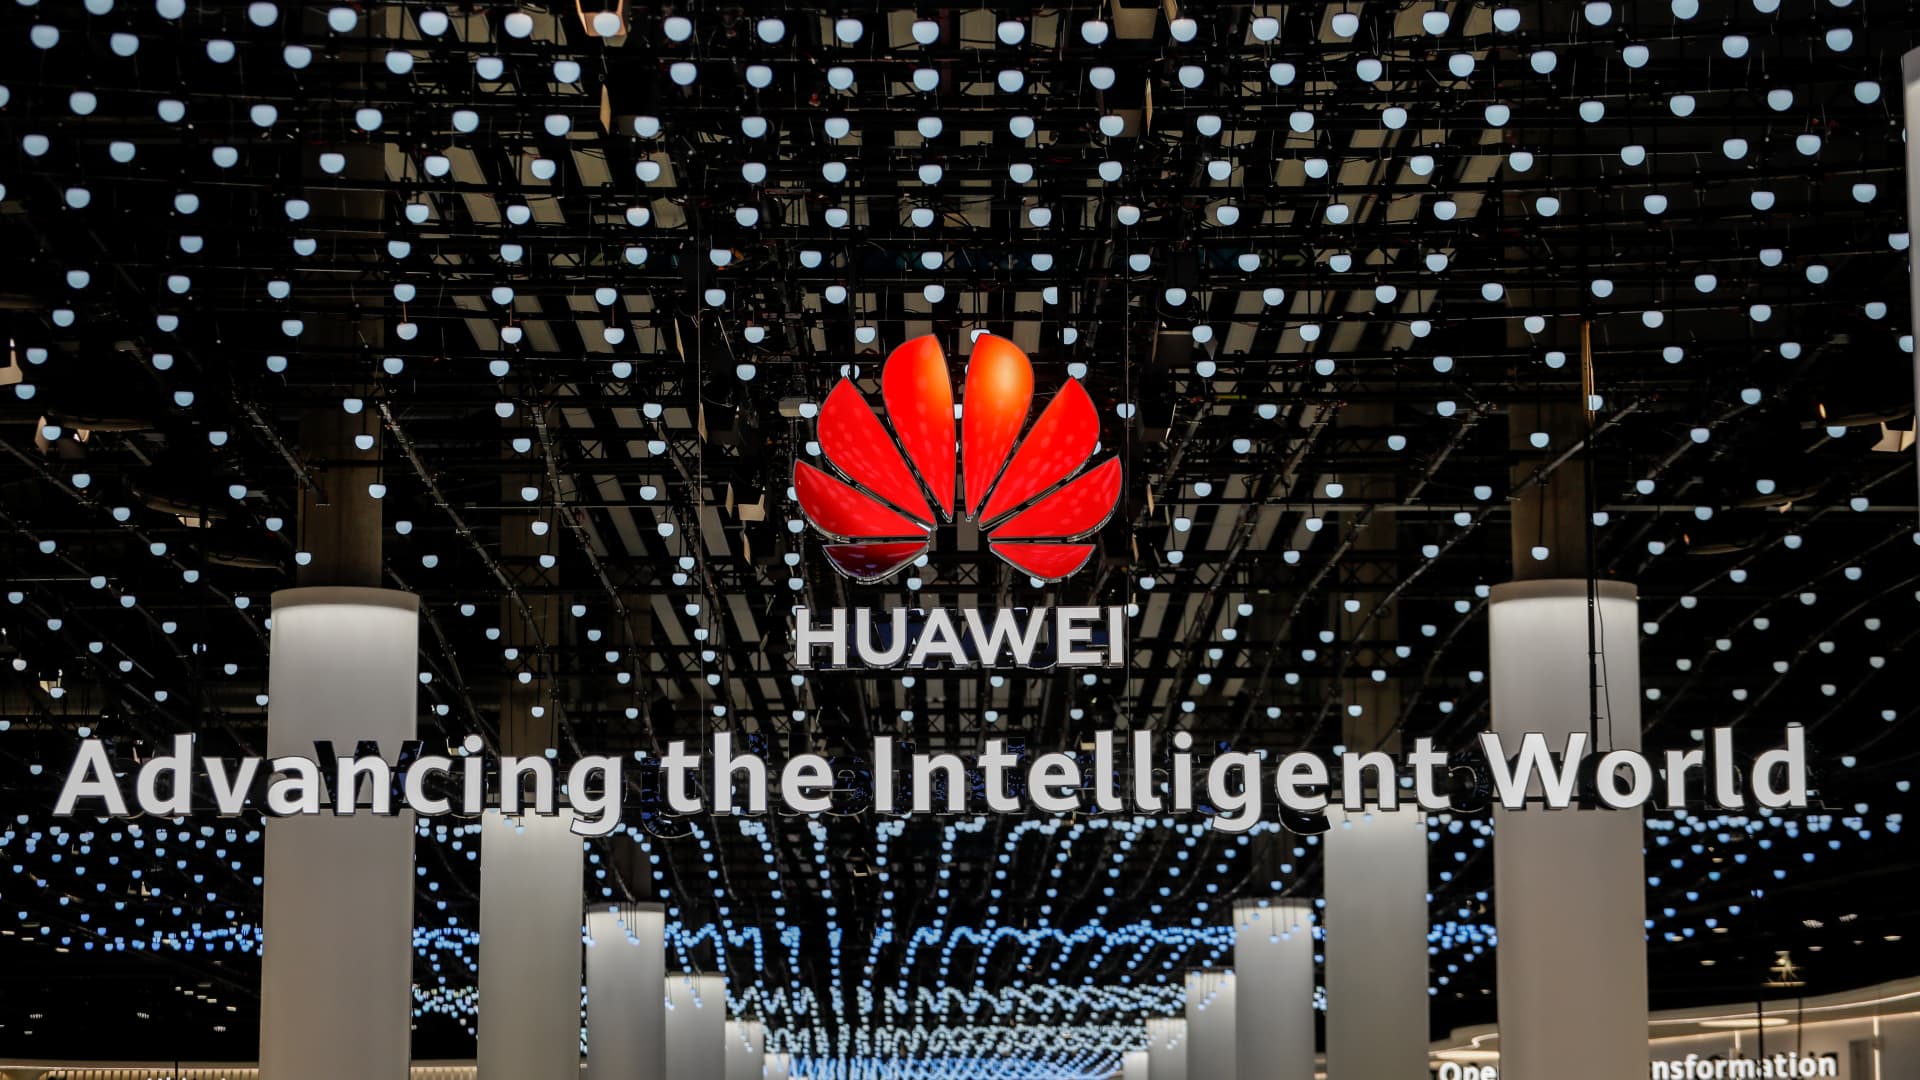 Huawei’s Net Profit Surges Due to Improved Product Offerings, Successful Smartphone Launch and Growing Intelligent Automobile Solutions Business.